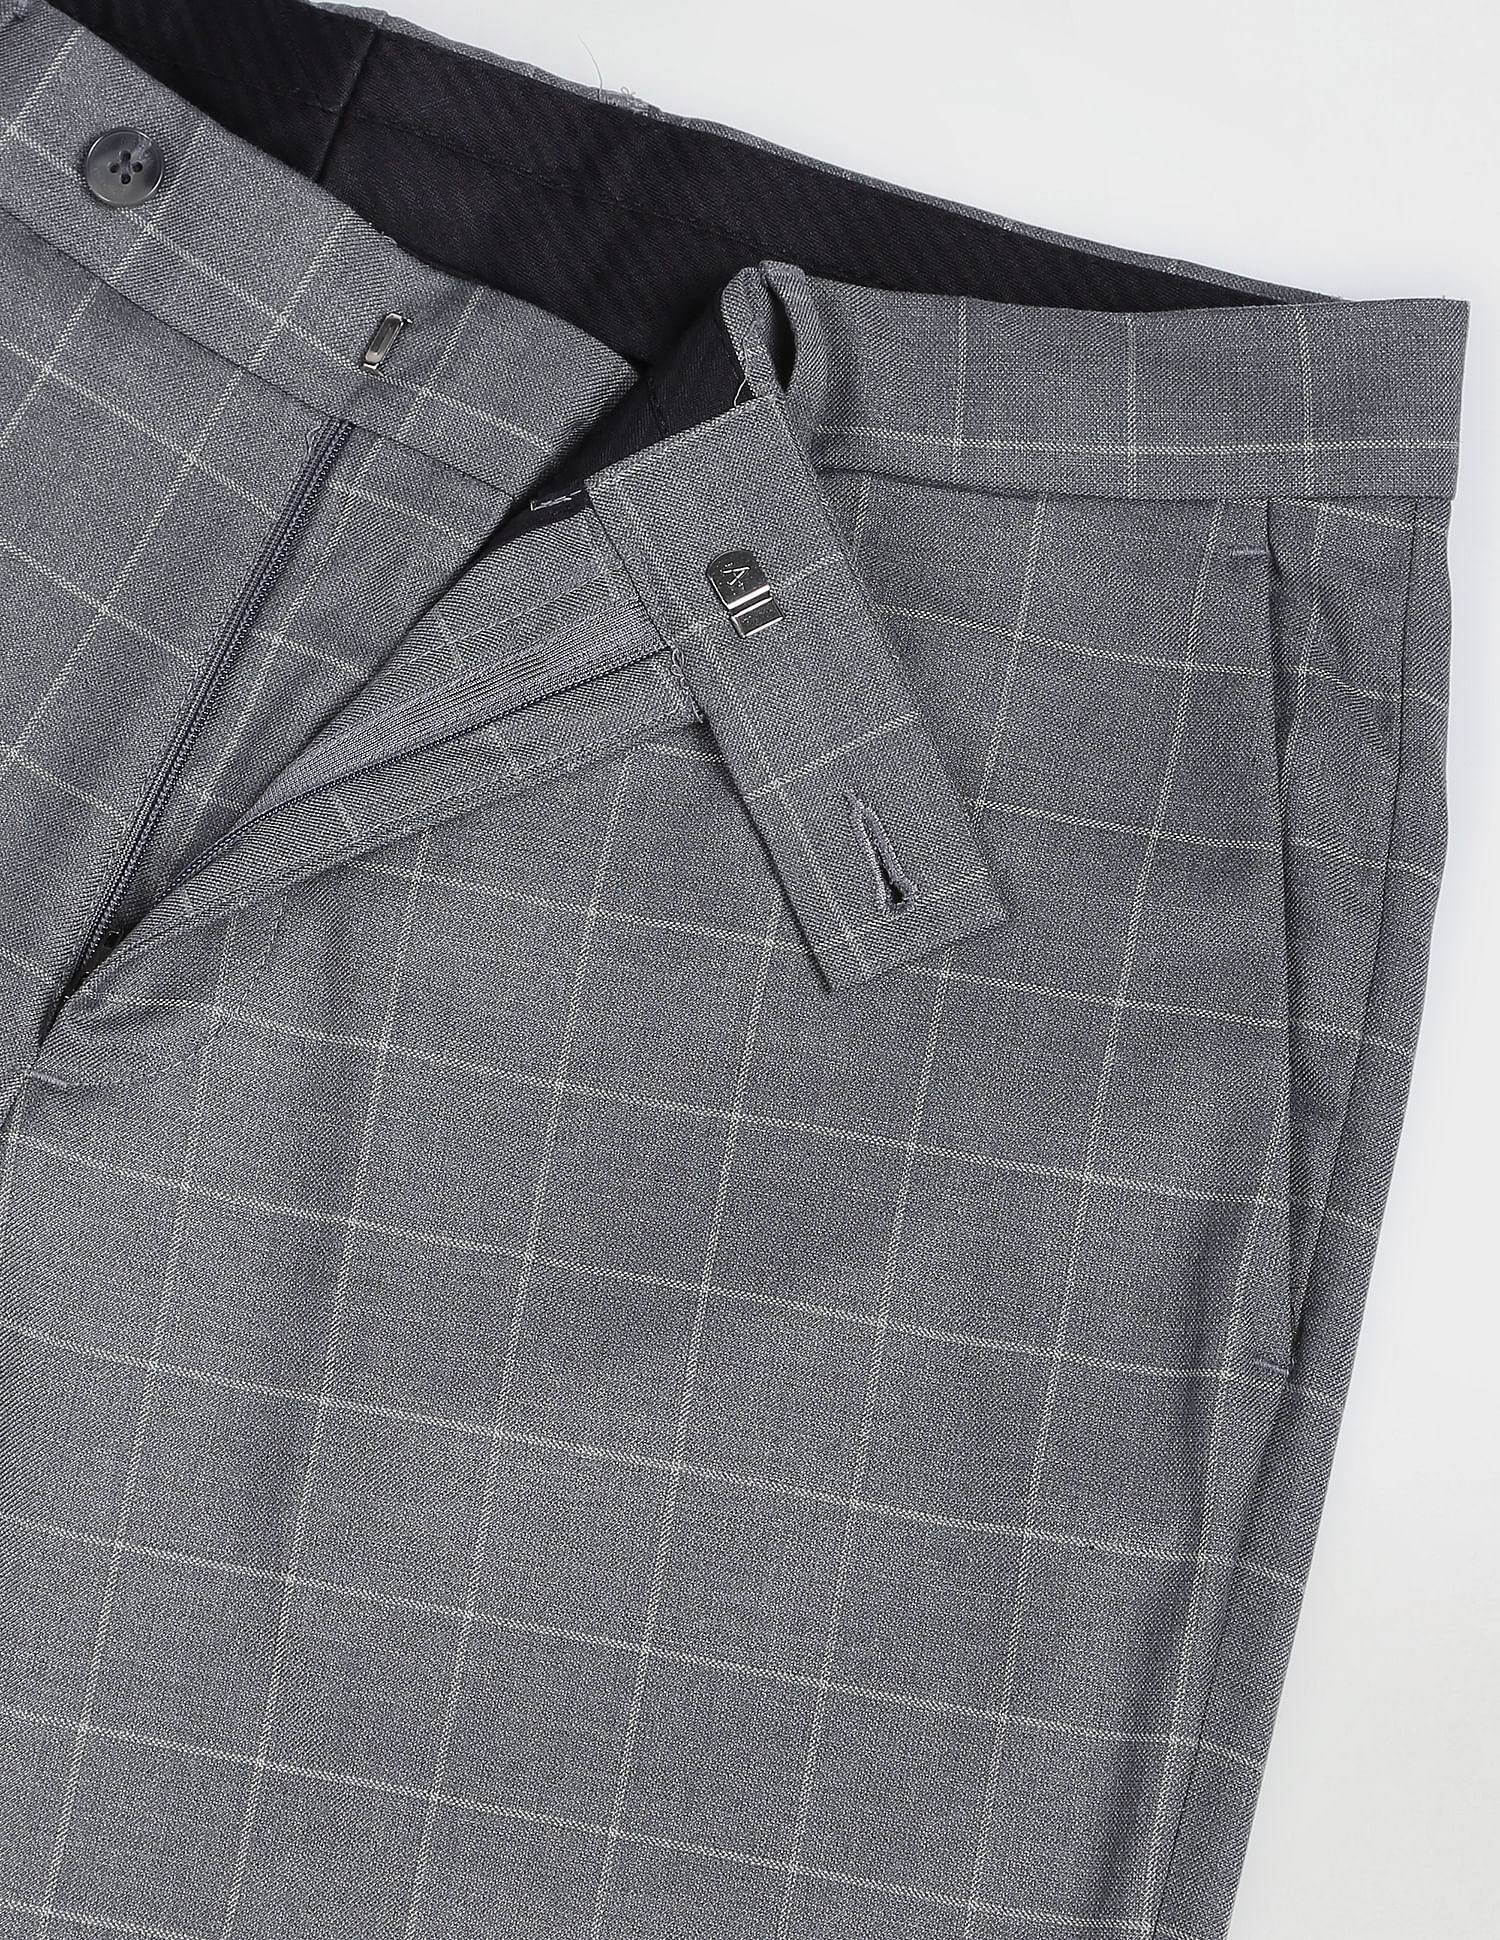 Windowpane Suit Pants In Wool Blend, A Great After-office Outfit